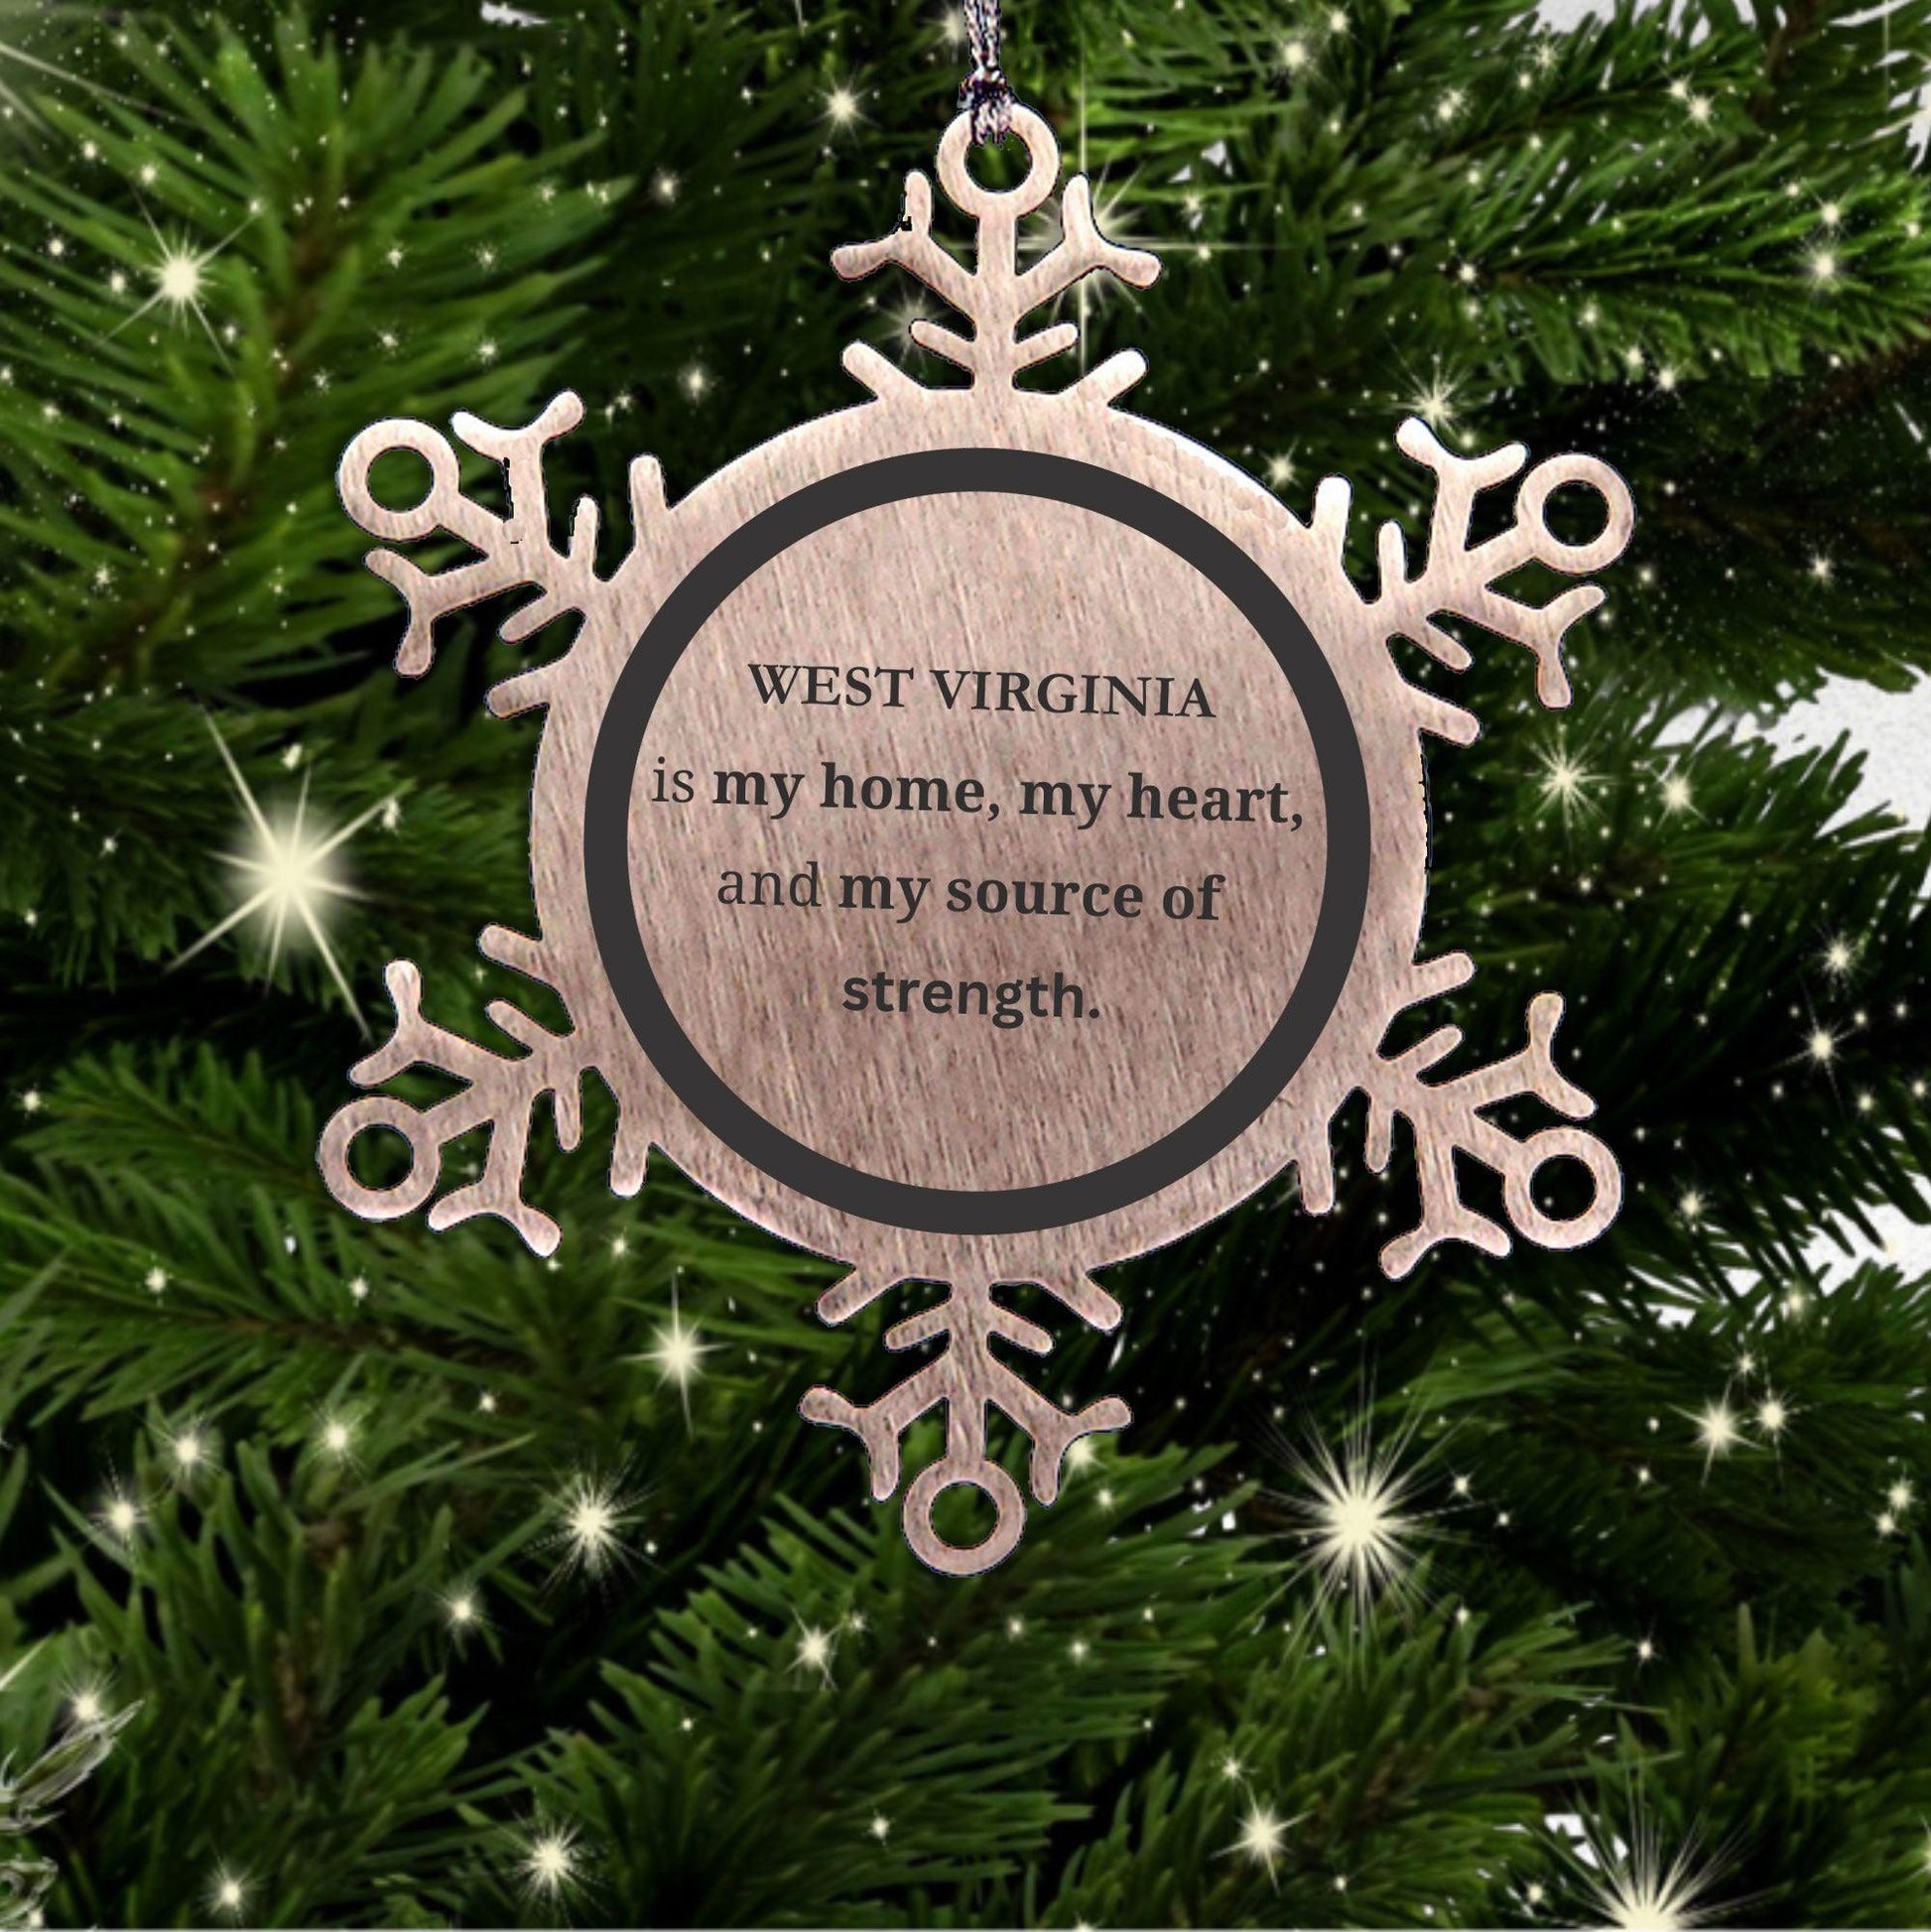 West Virginia is my home Gifts, Lovely West Virginia Birthday Christmas Snowflake Ornament For People from West Virginia, Men, Women, Friends - Mallard Moon Gift Shop